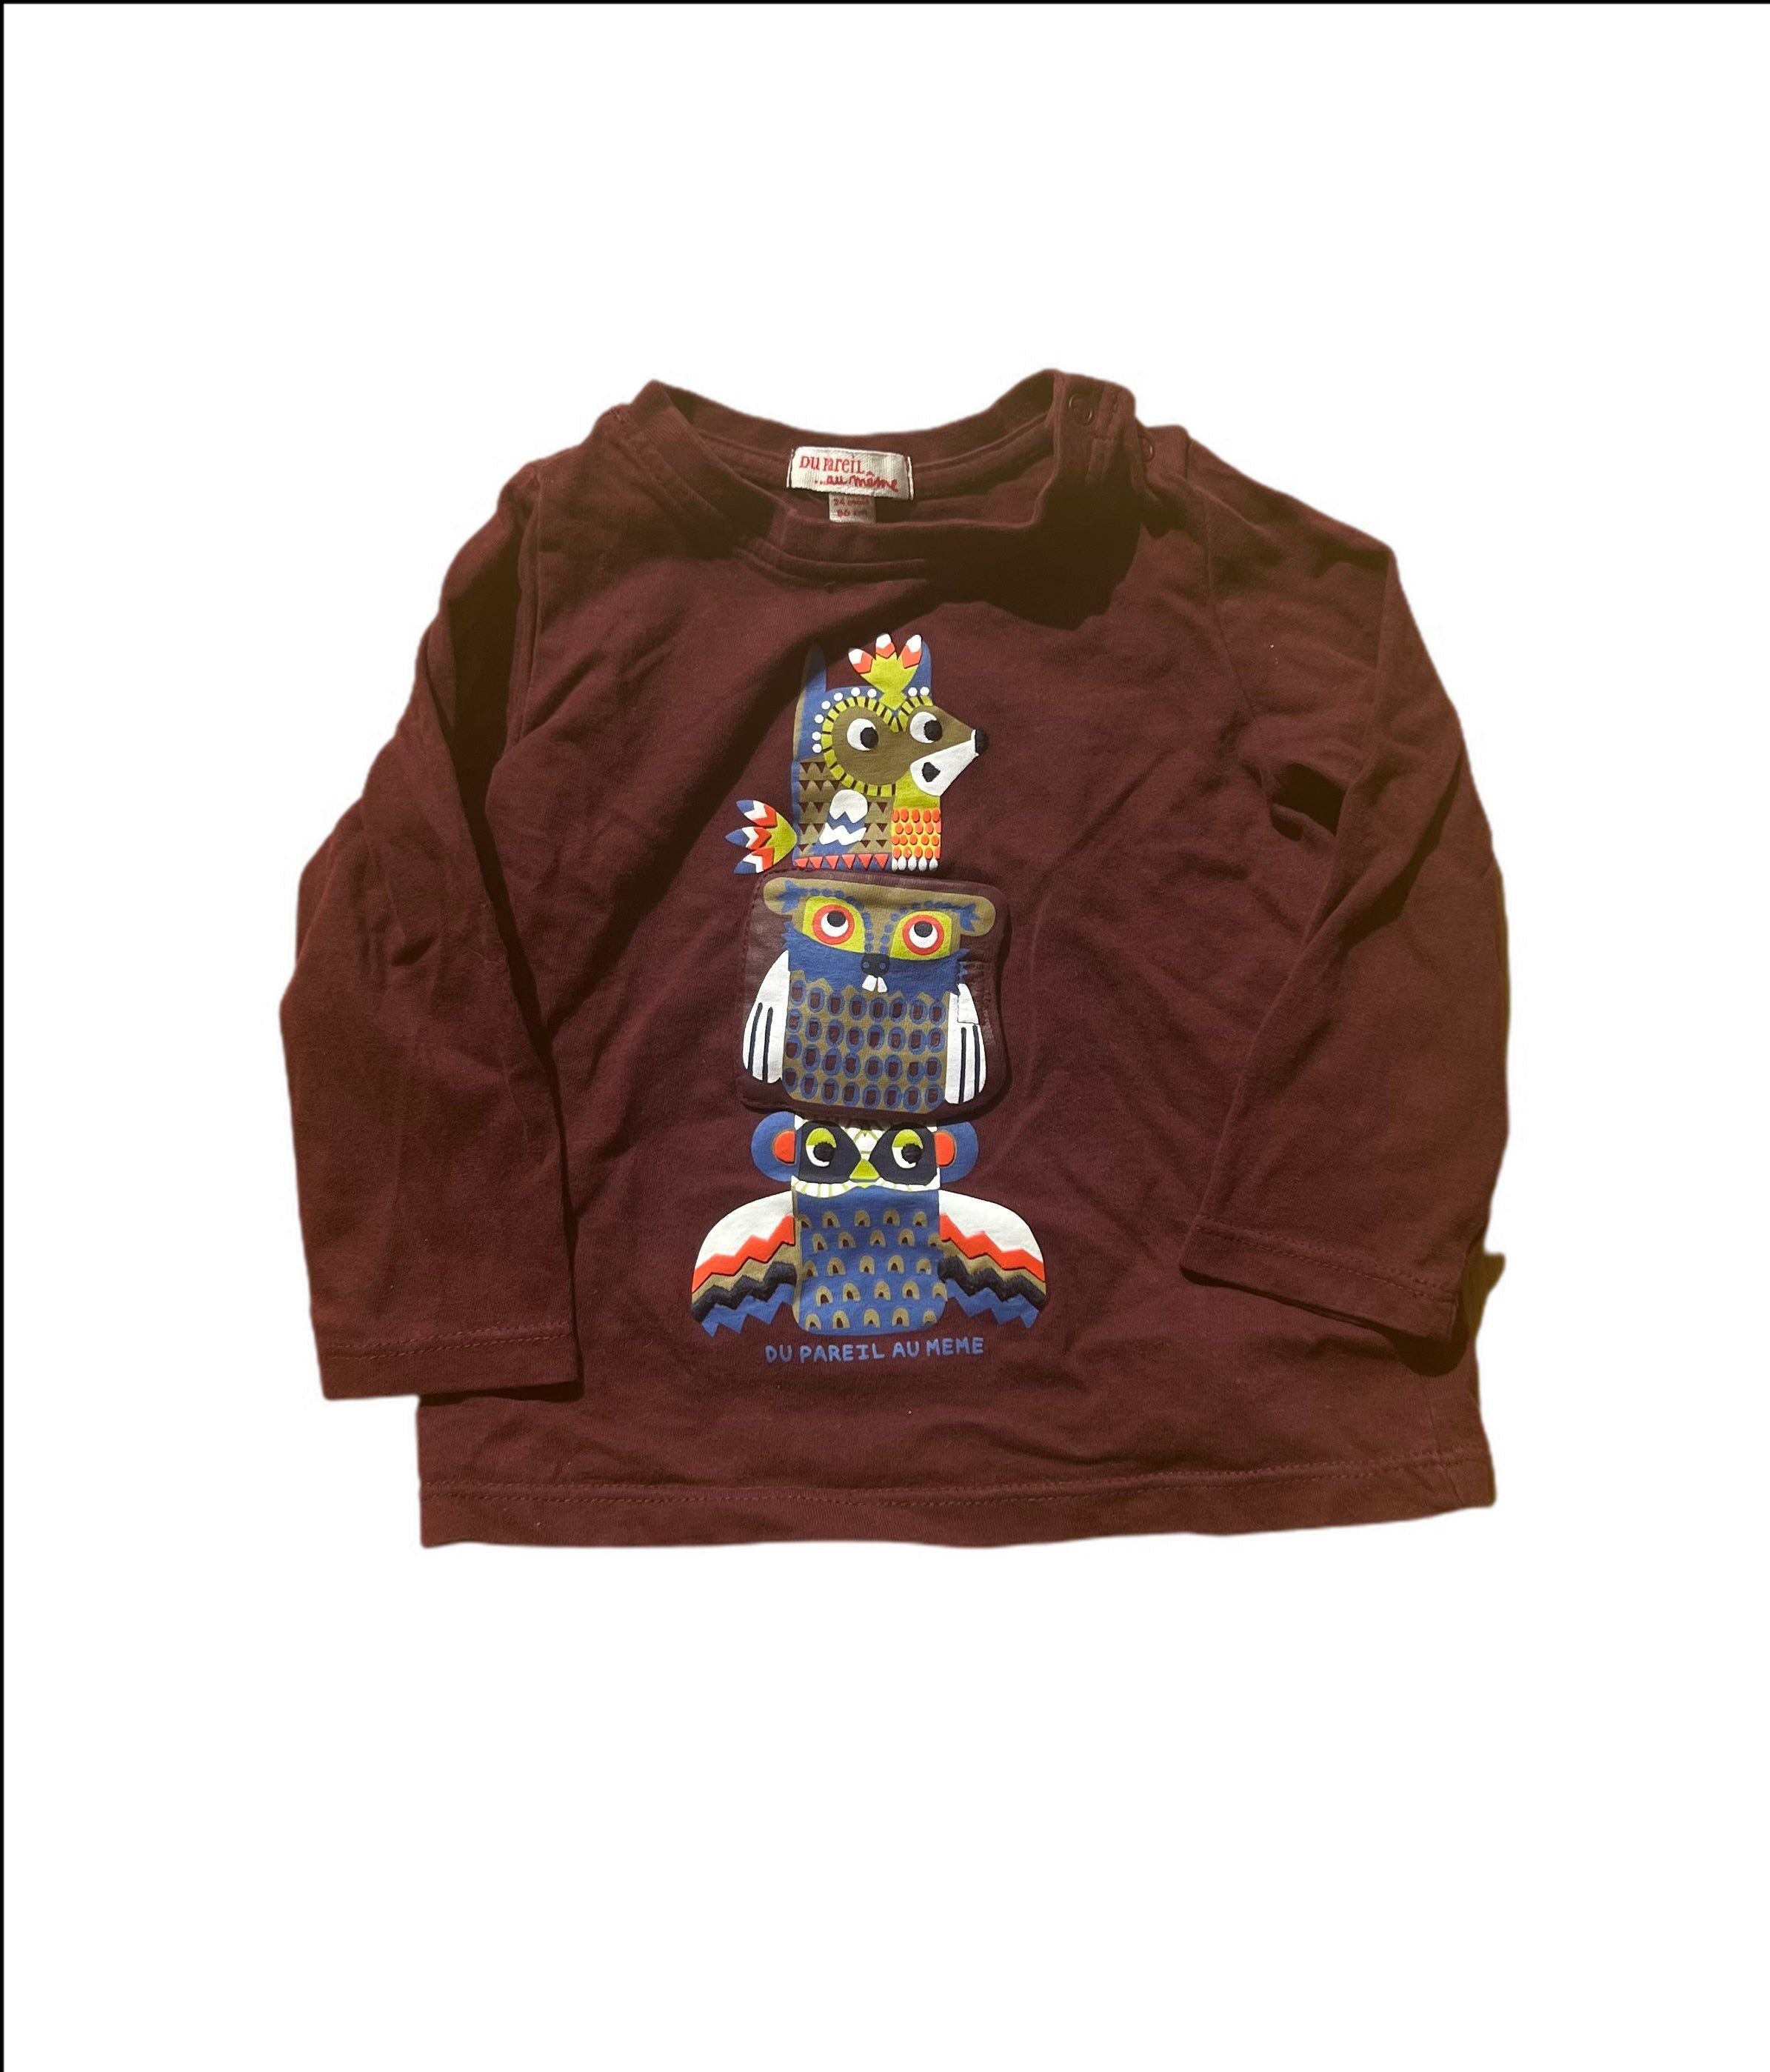 Long sleeve totempole top